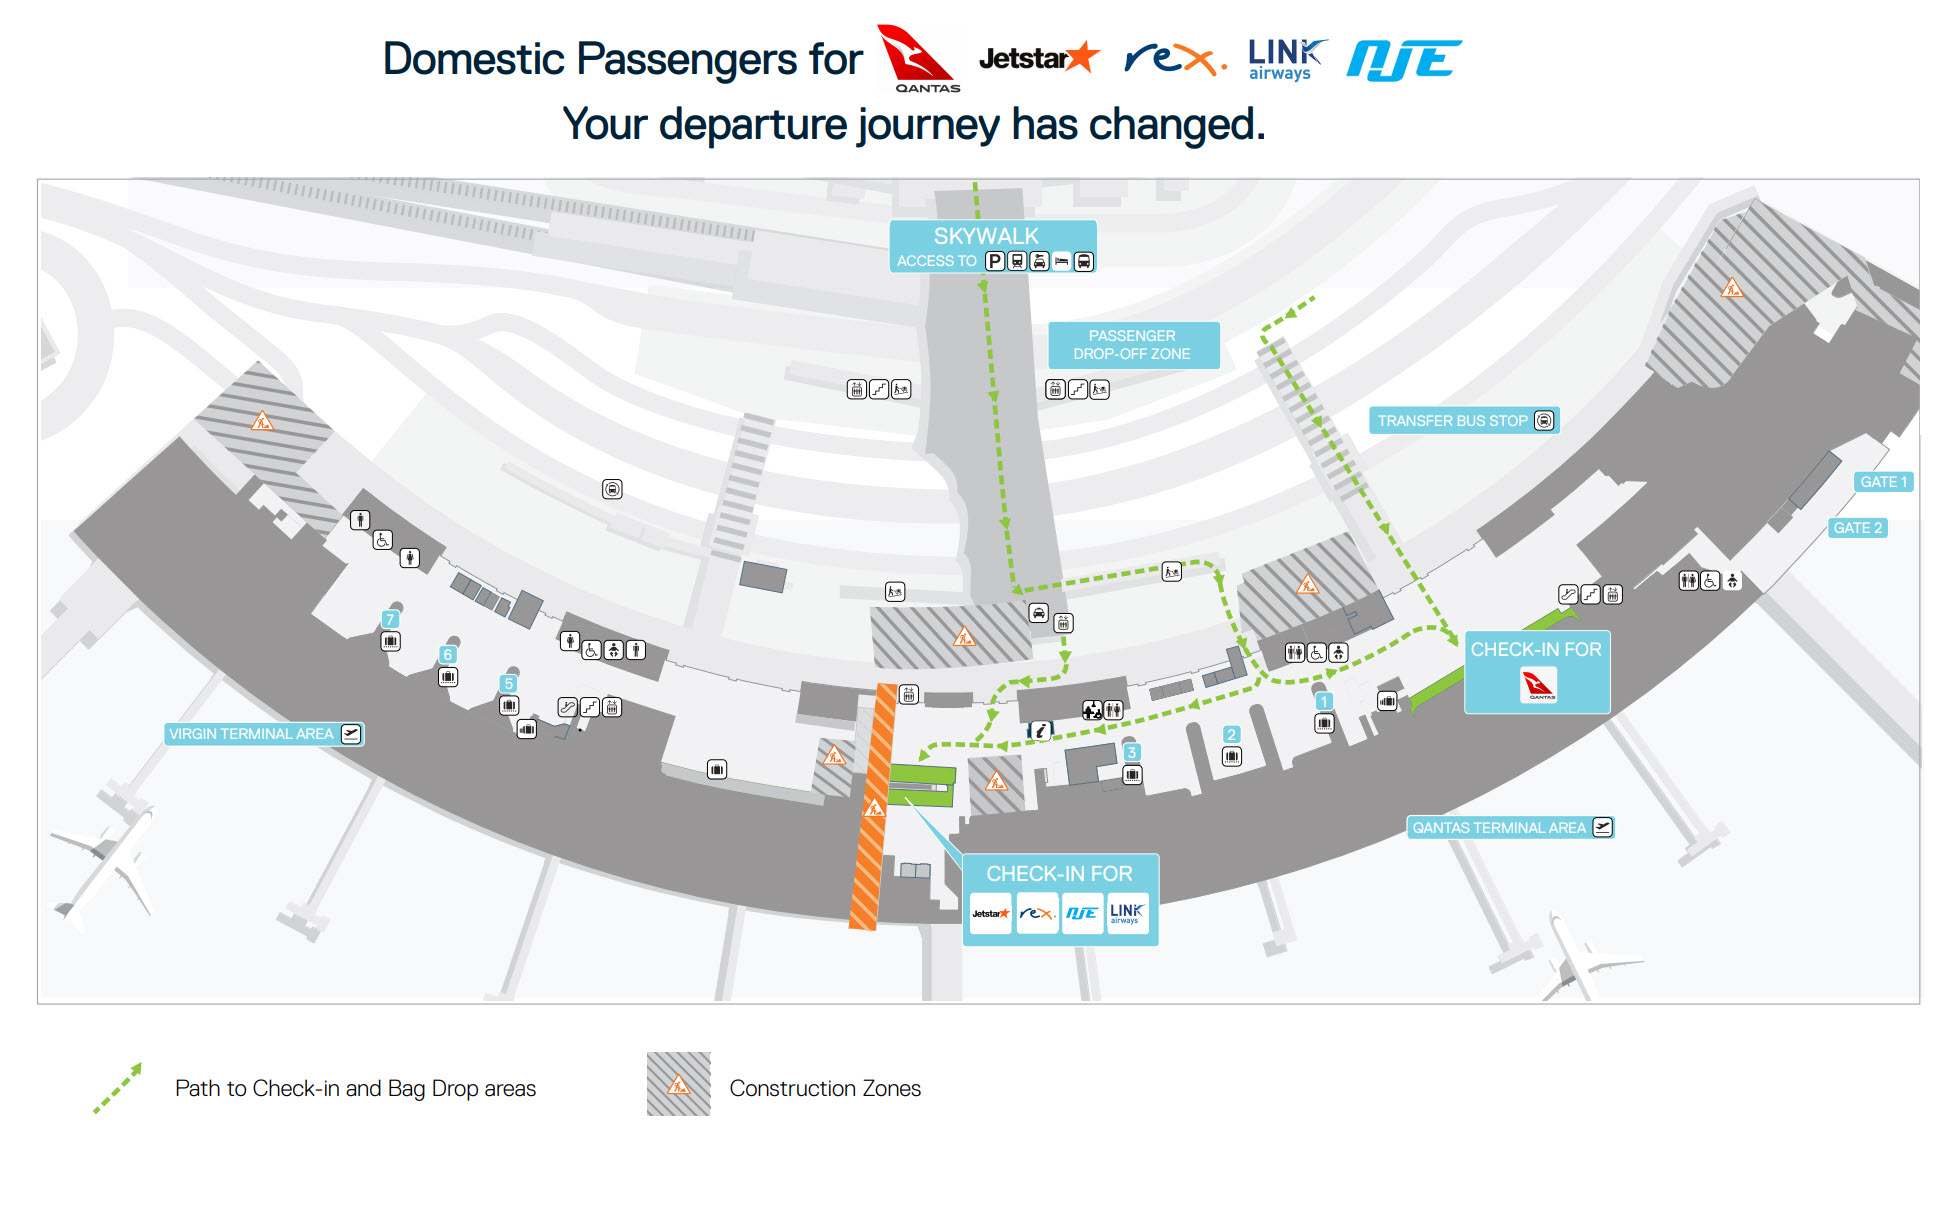 Map showing the paths for check in for Qantas, Jetstar, Rex, Link & NJE